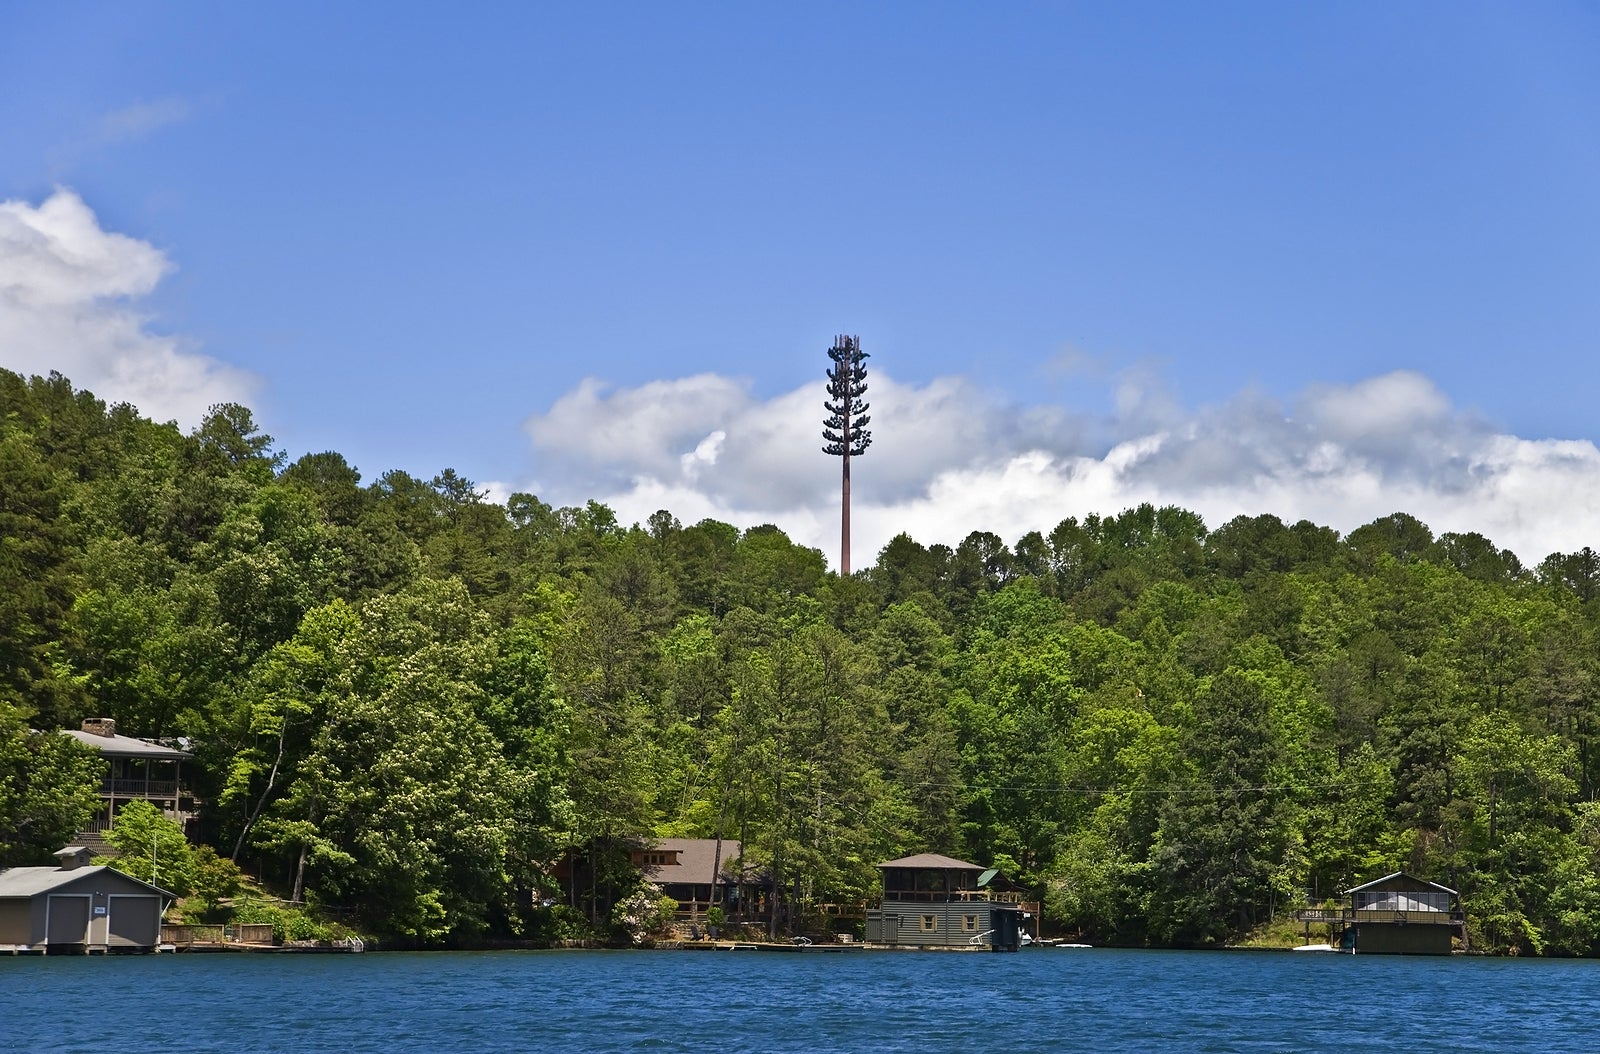 A cell tower high above the tree line over homes and a lake.